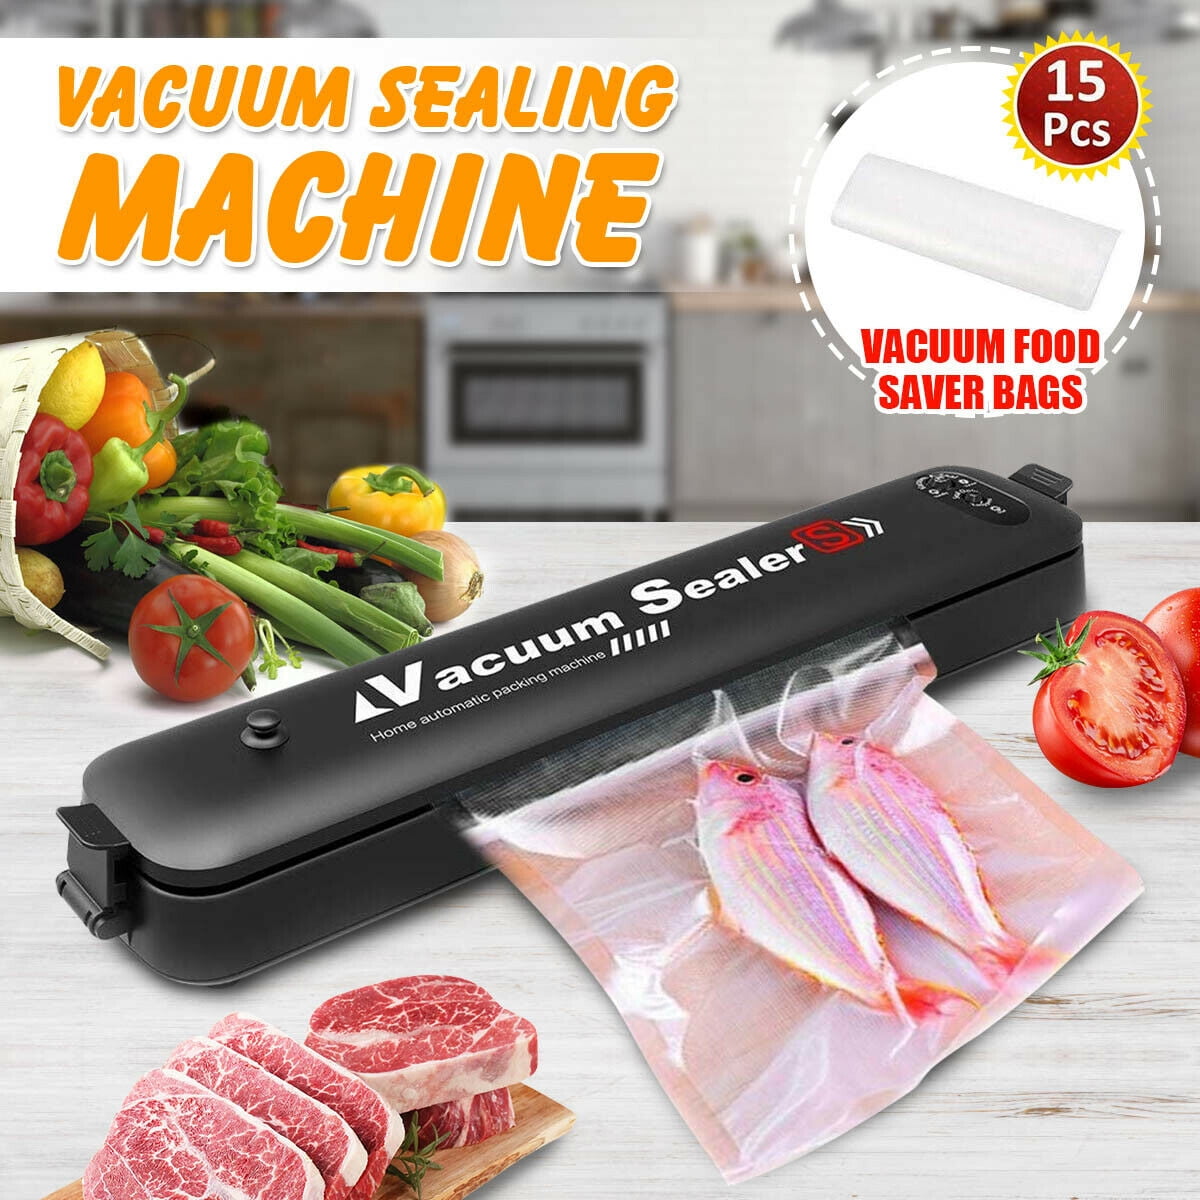 Commercial Vacuum Sealer Machine Seal a Meal Automatic Food Saver System 